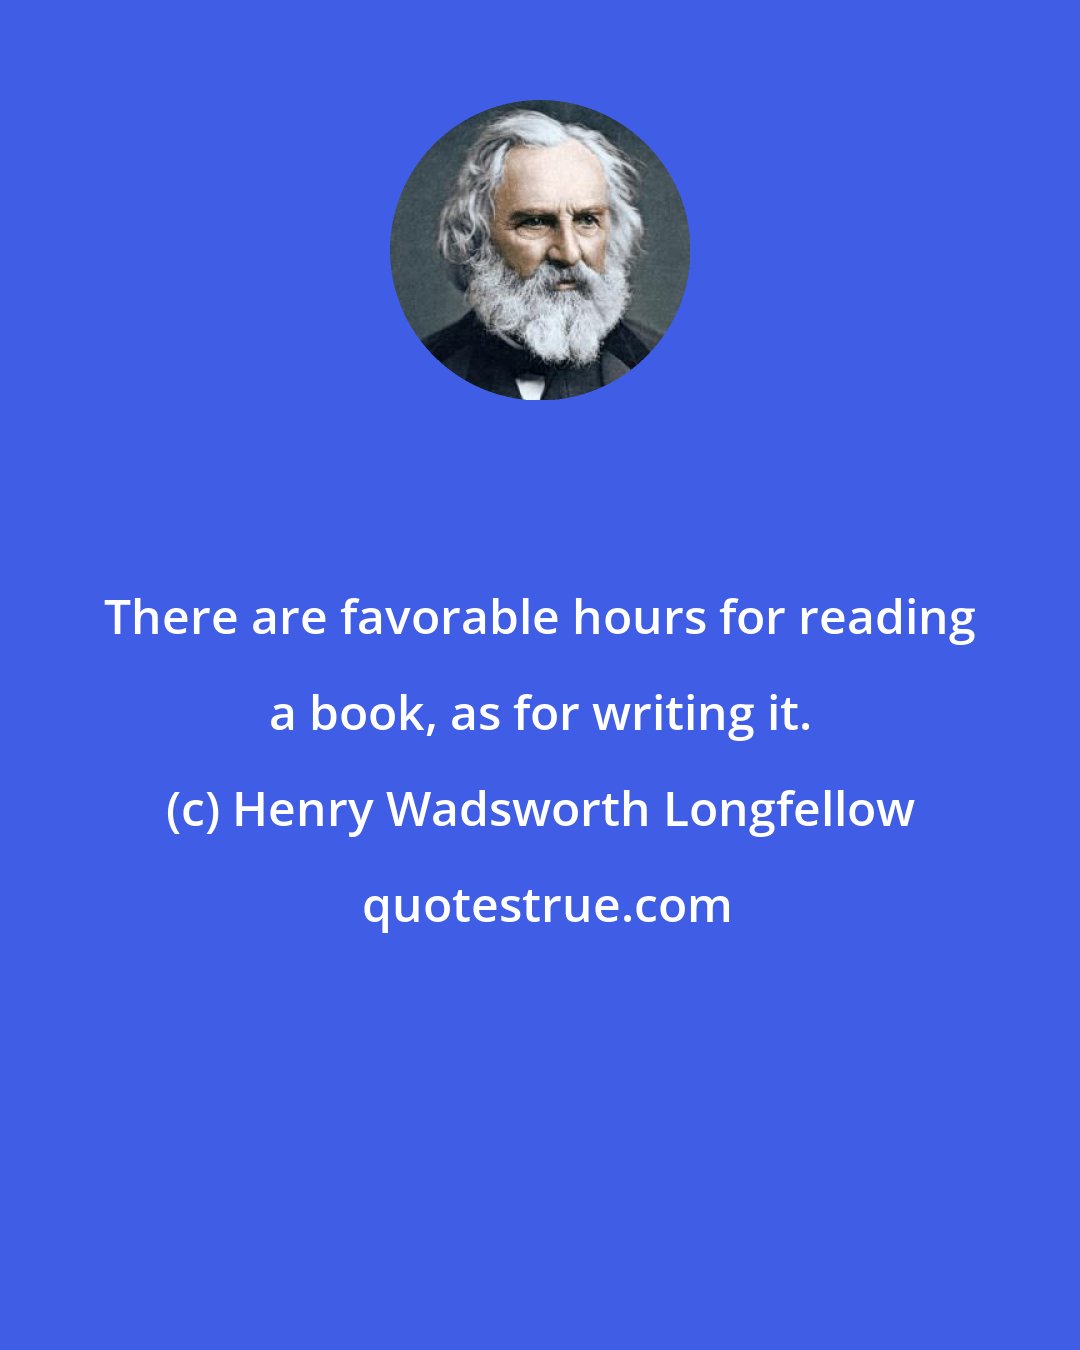 Henry Wadsworth Longfellow: There are favorable hours for reading a book, as for writing it.